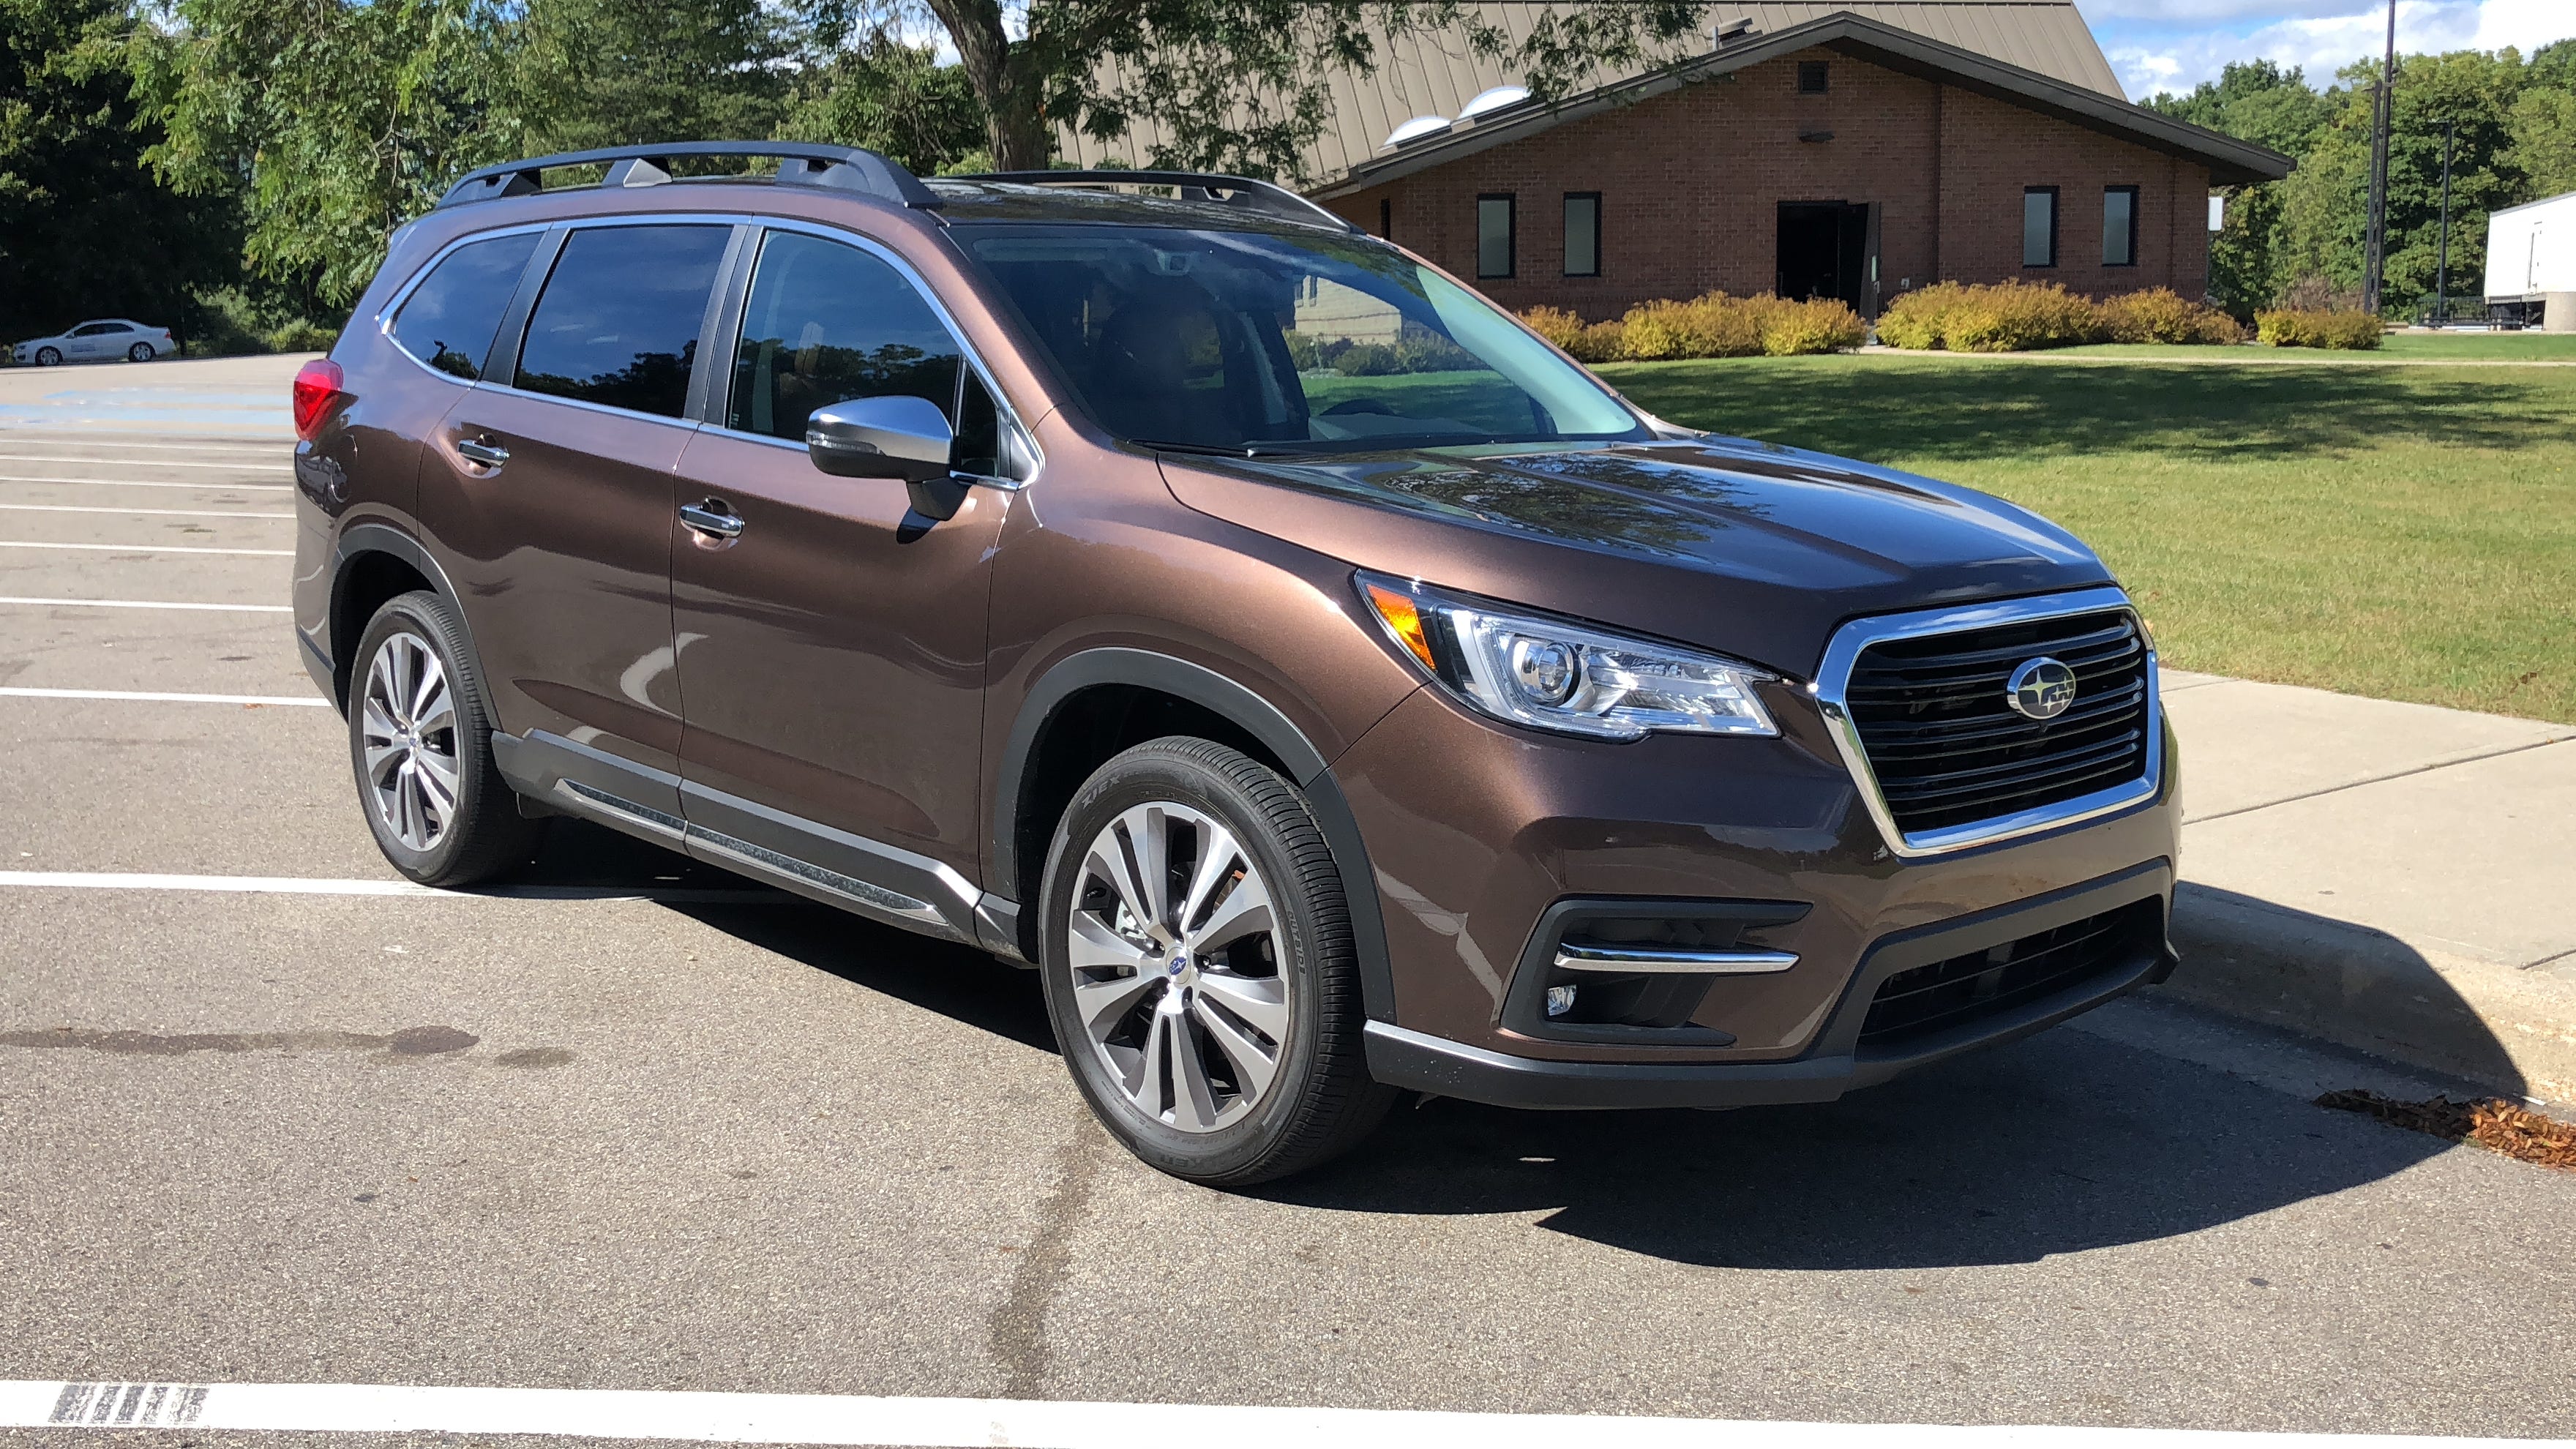 Review: 2019 Ascent is Subaru families have been waiting for